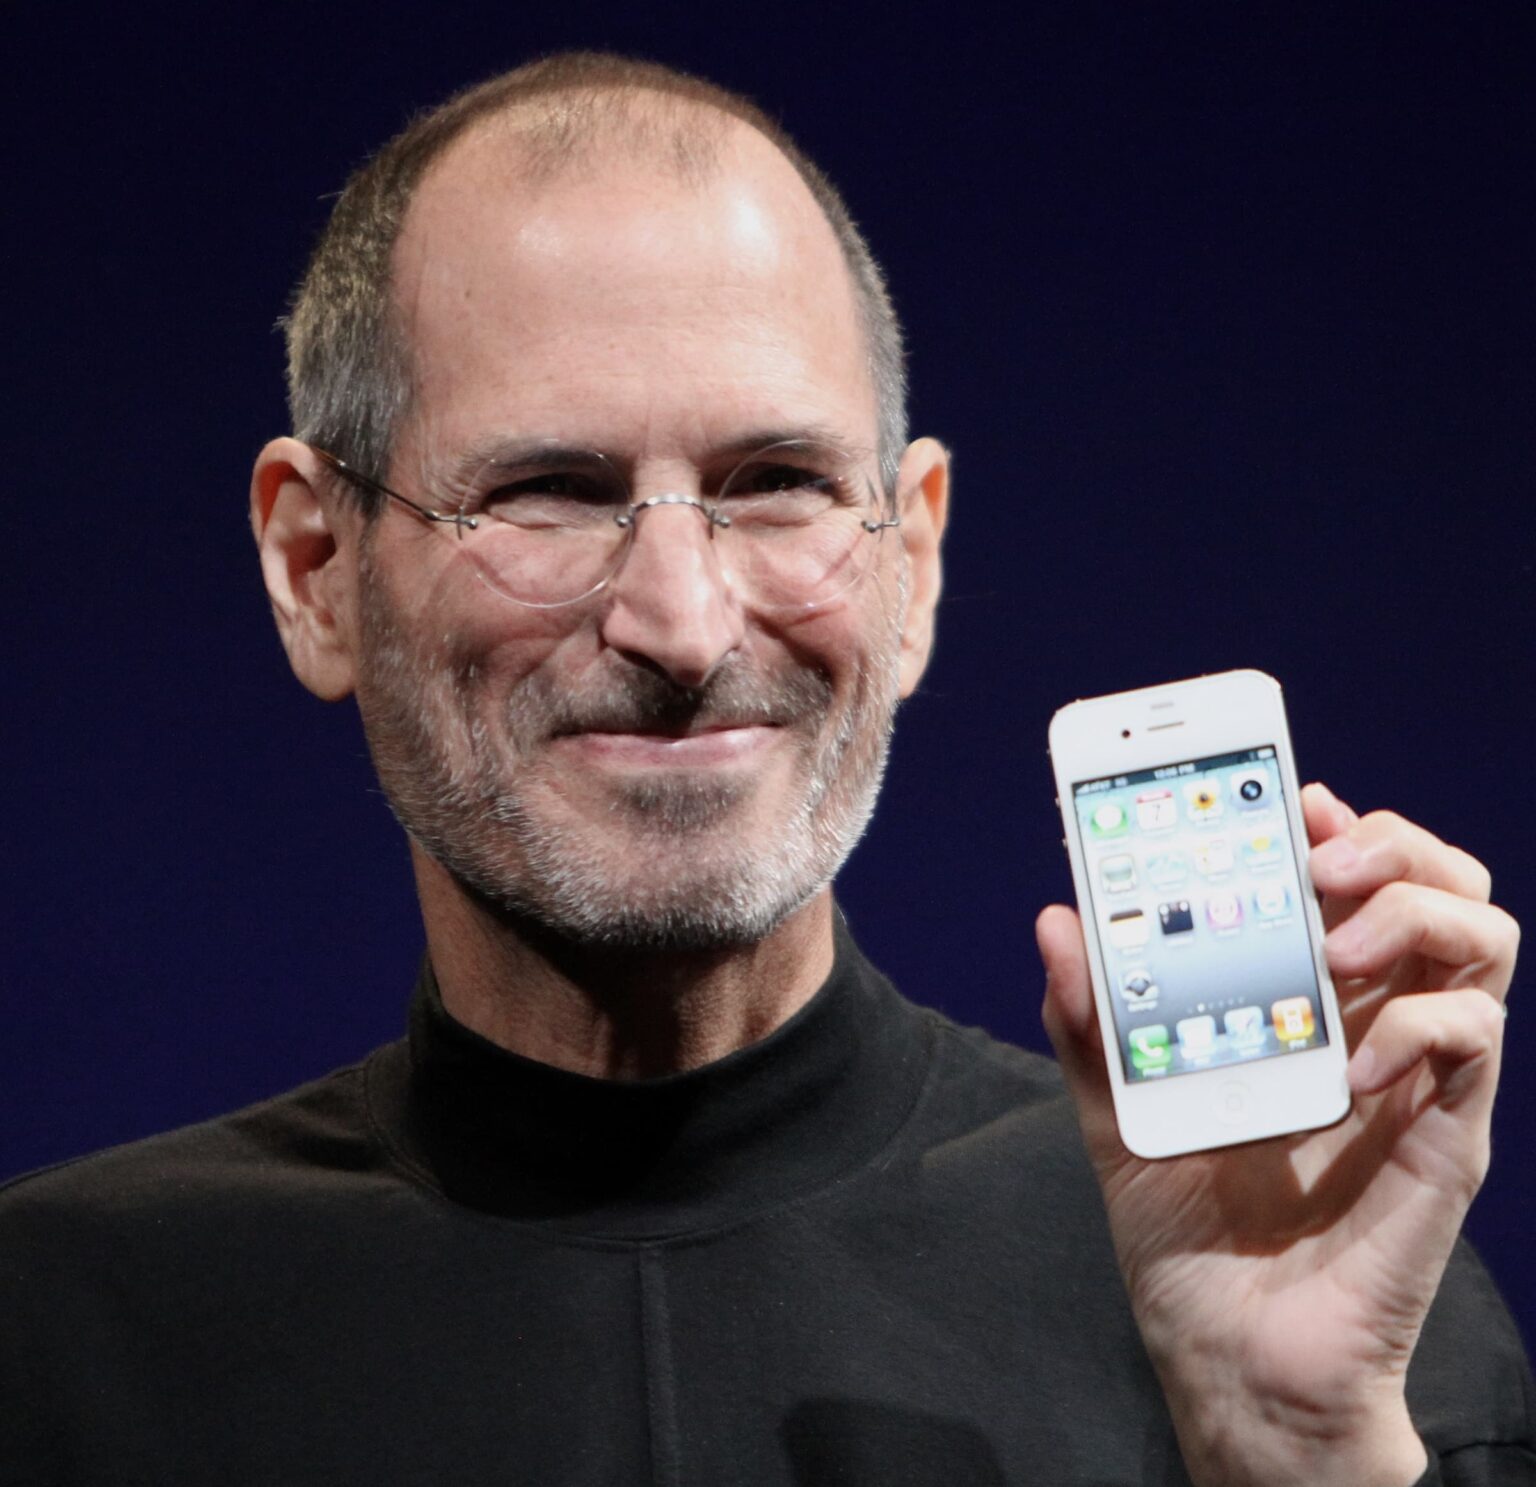 The legendary founder of Apple revolutionized technology, communication, and more. Check out all the best Steve Jobs movies to remember him by here.